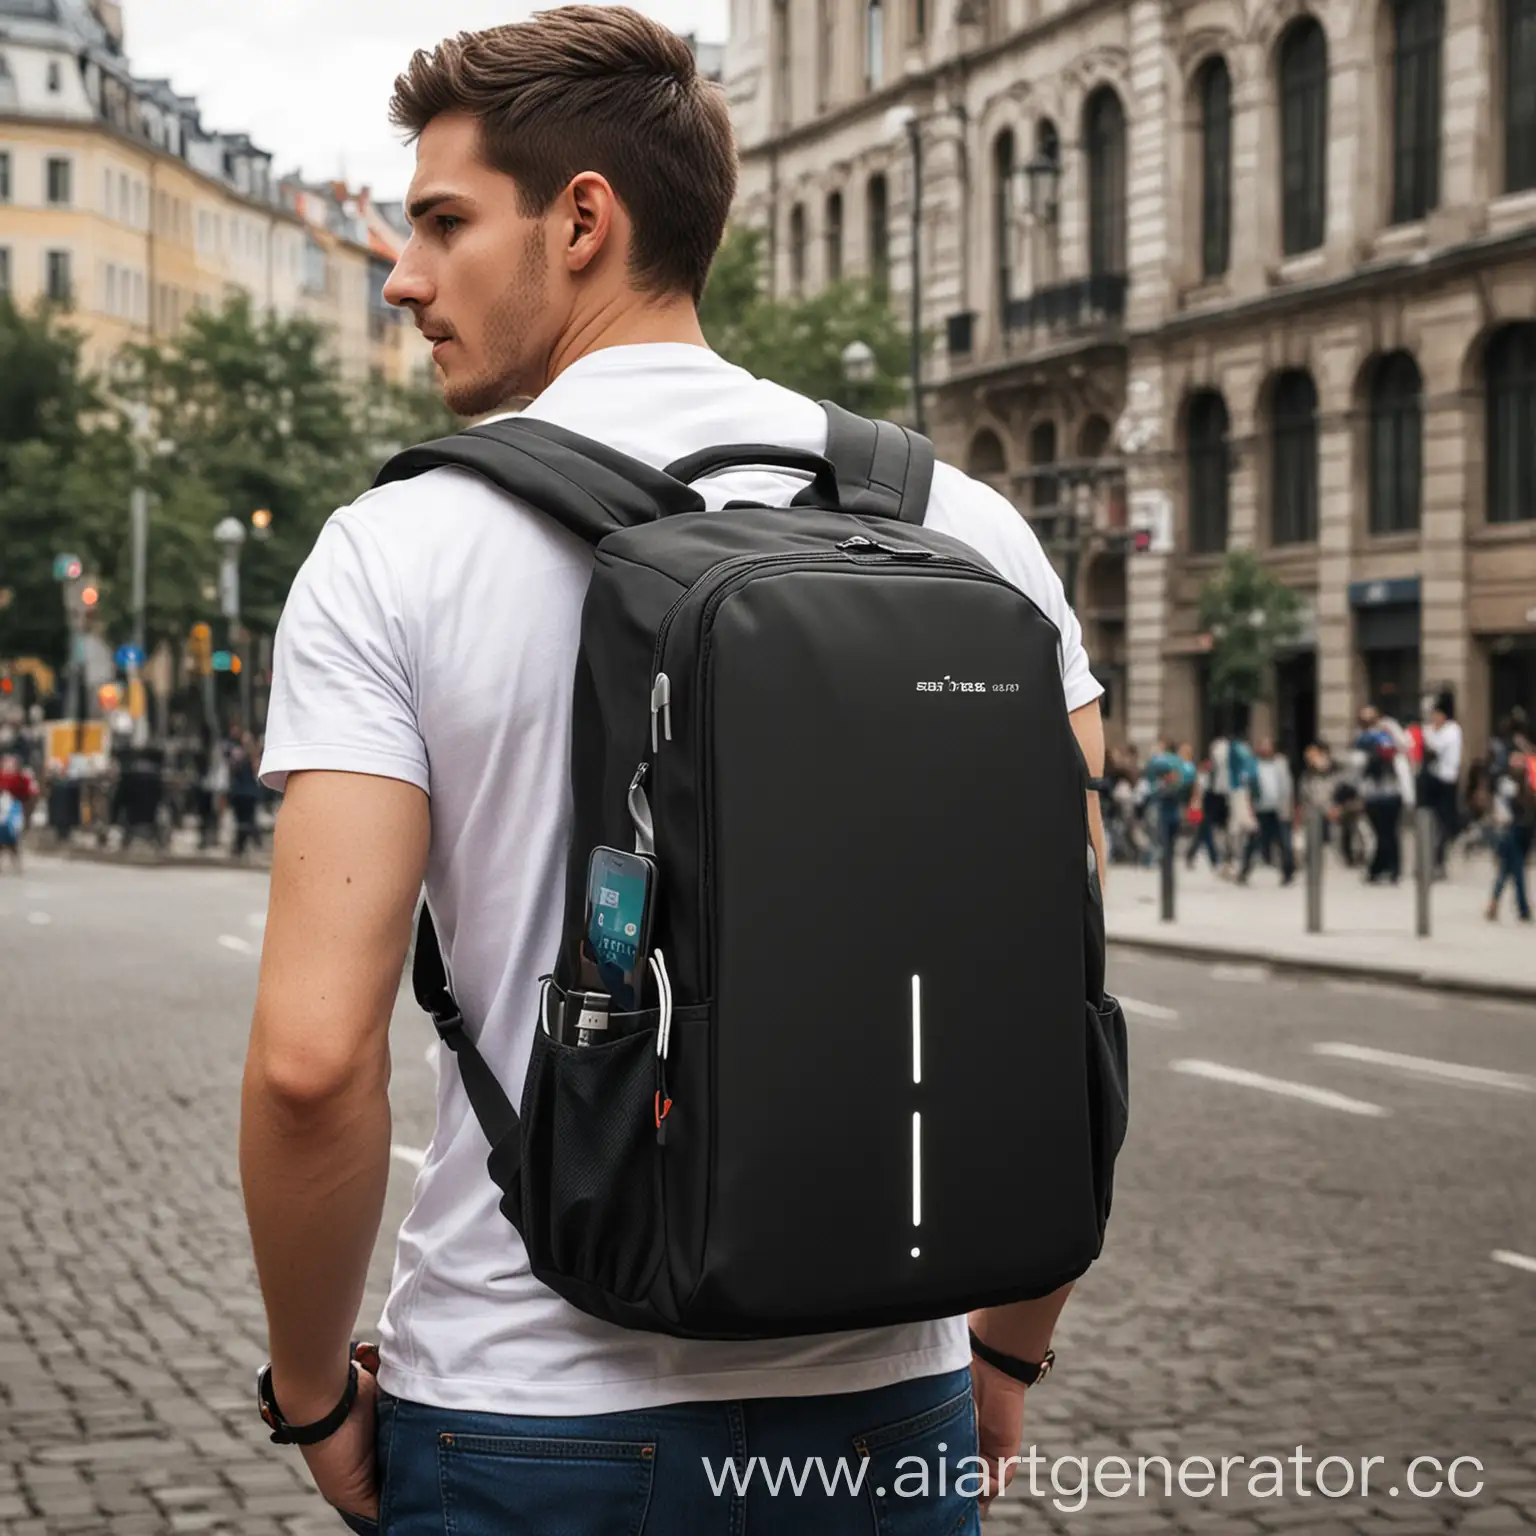 Modern-Backpack-with-Integrated-Gadgets-Charger-and-GPS-Tracker